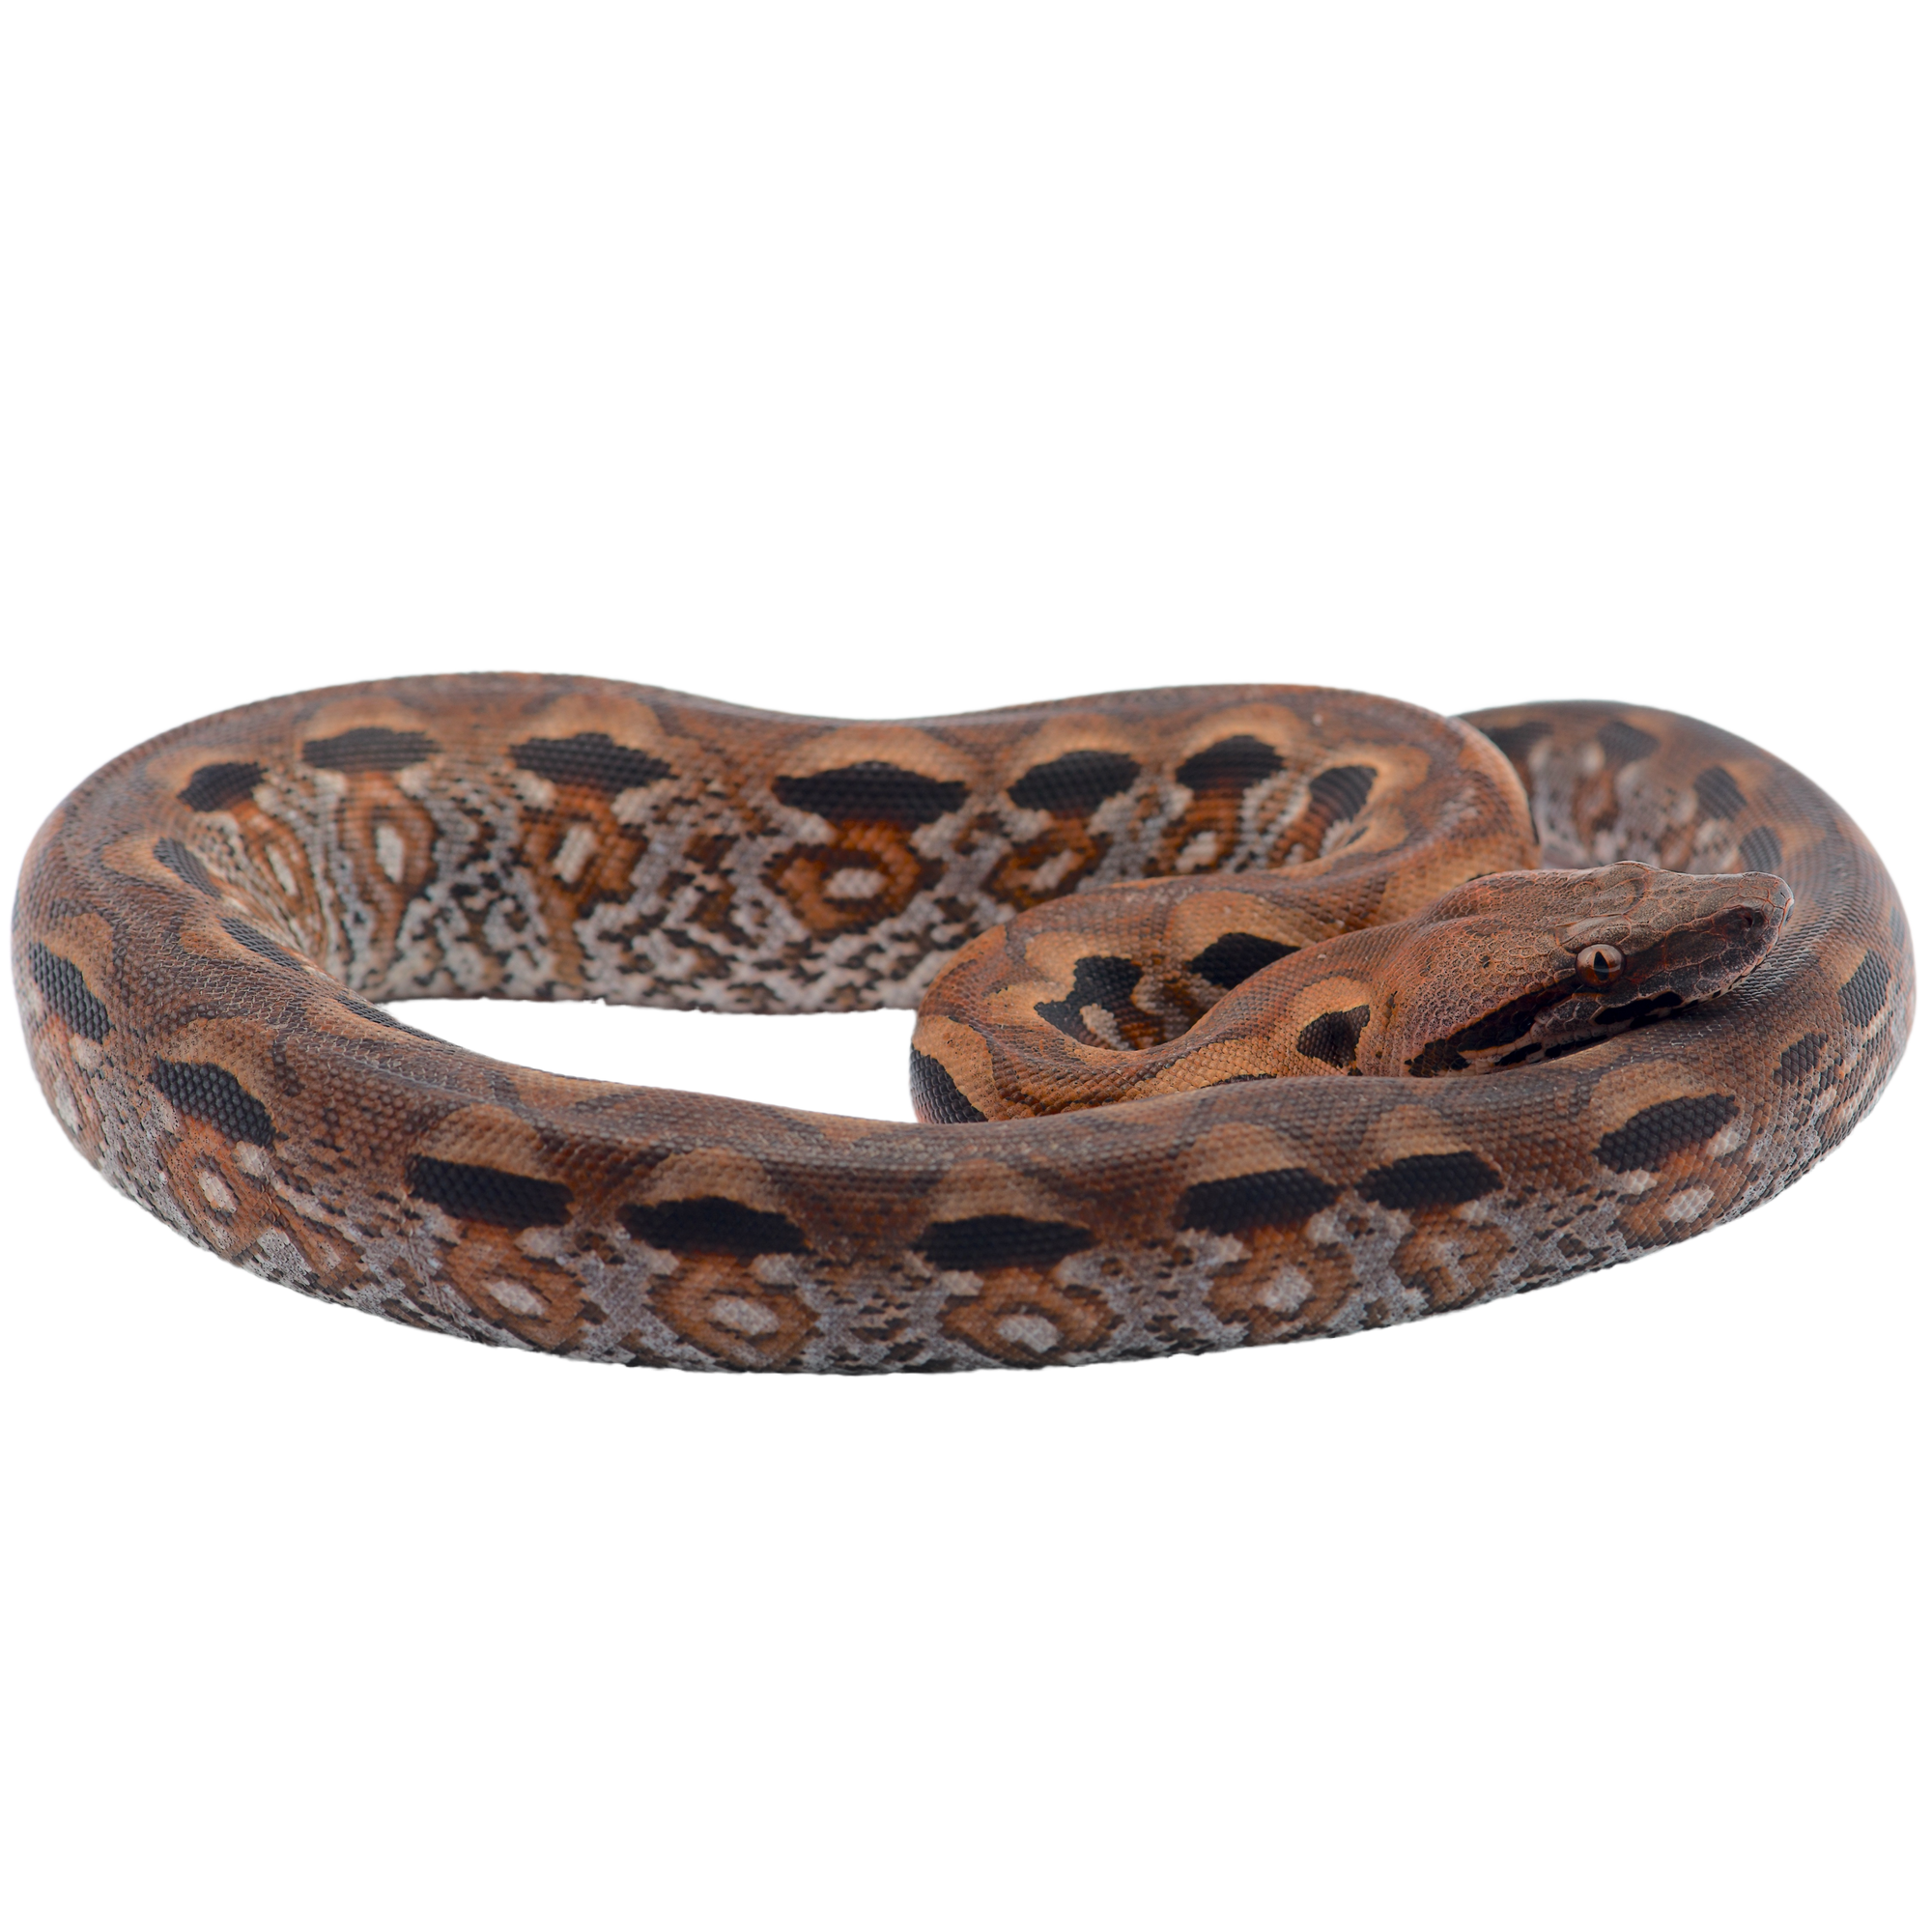 Best substrate for a Madagascar Ground Boa Acrantophis madagascariensis ReptiChip